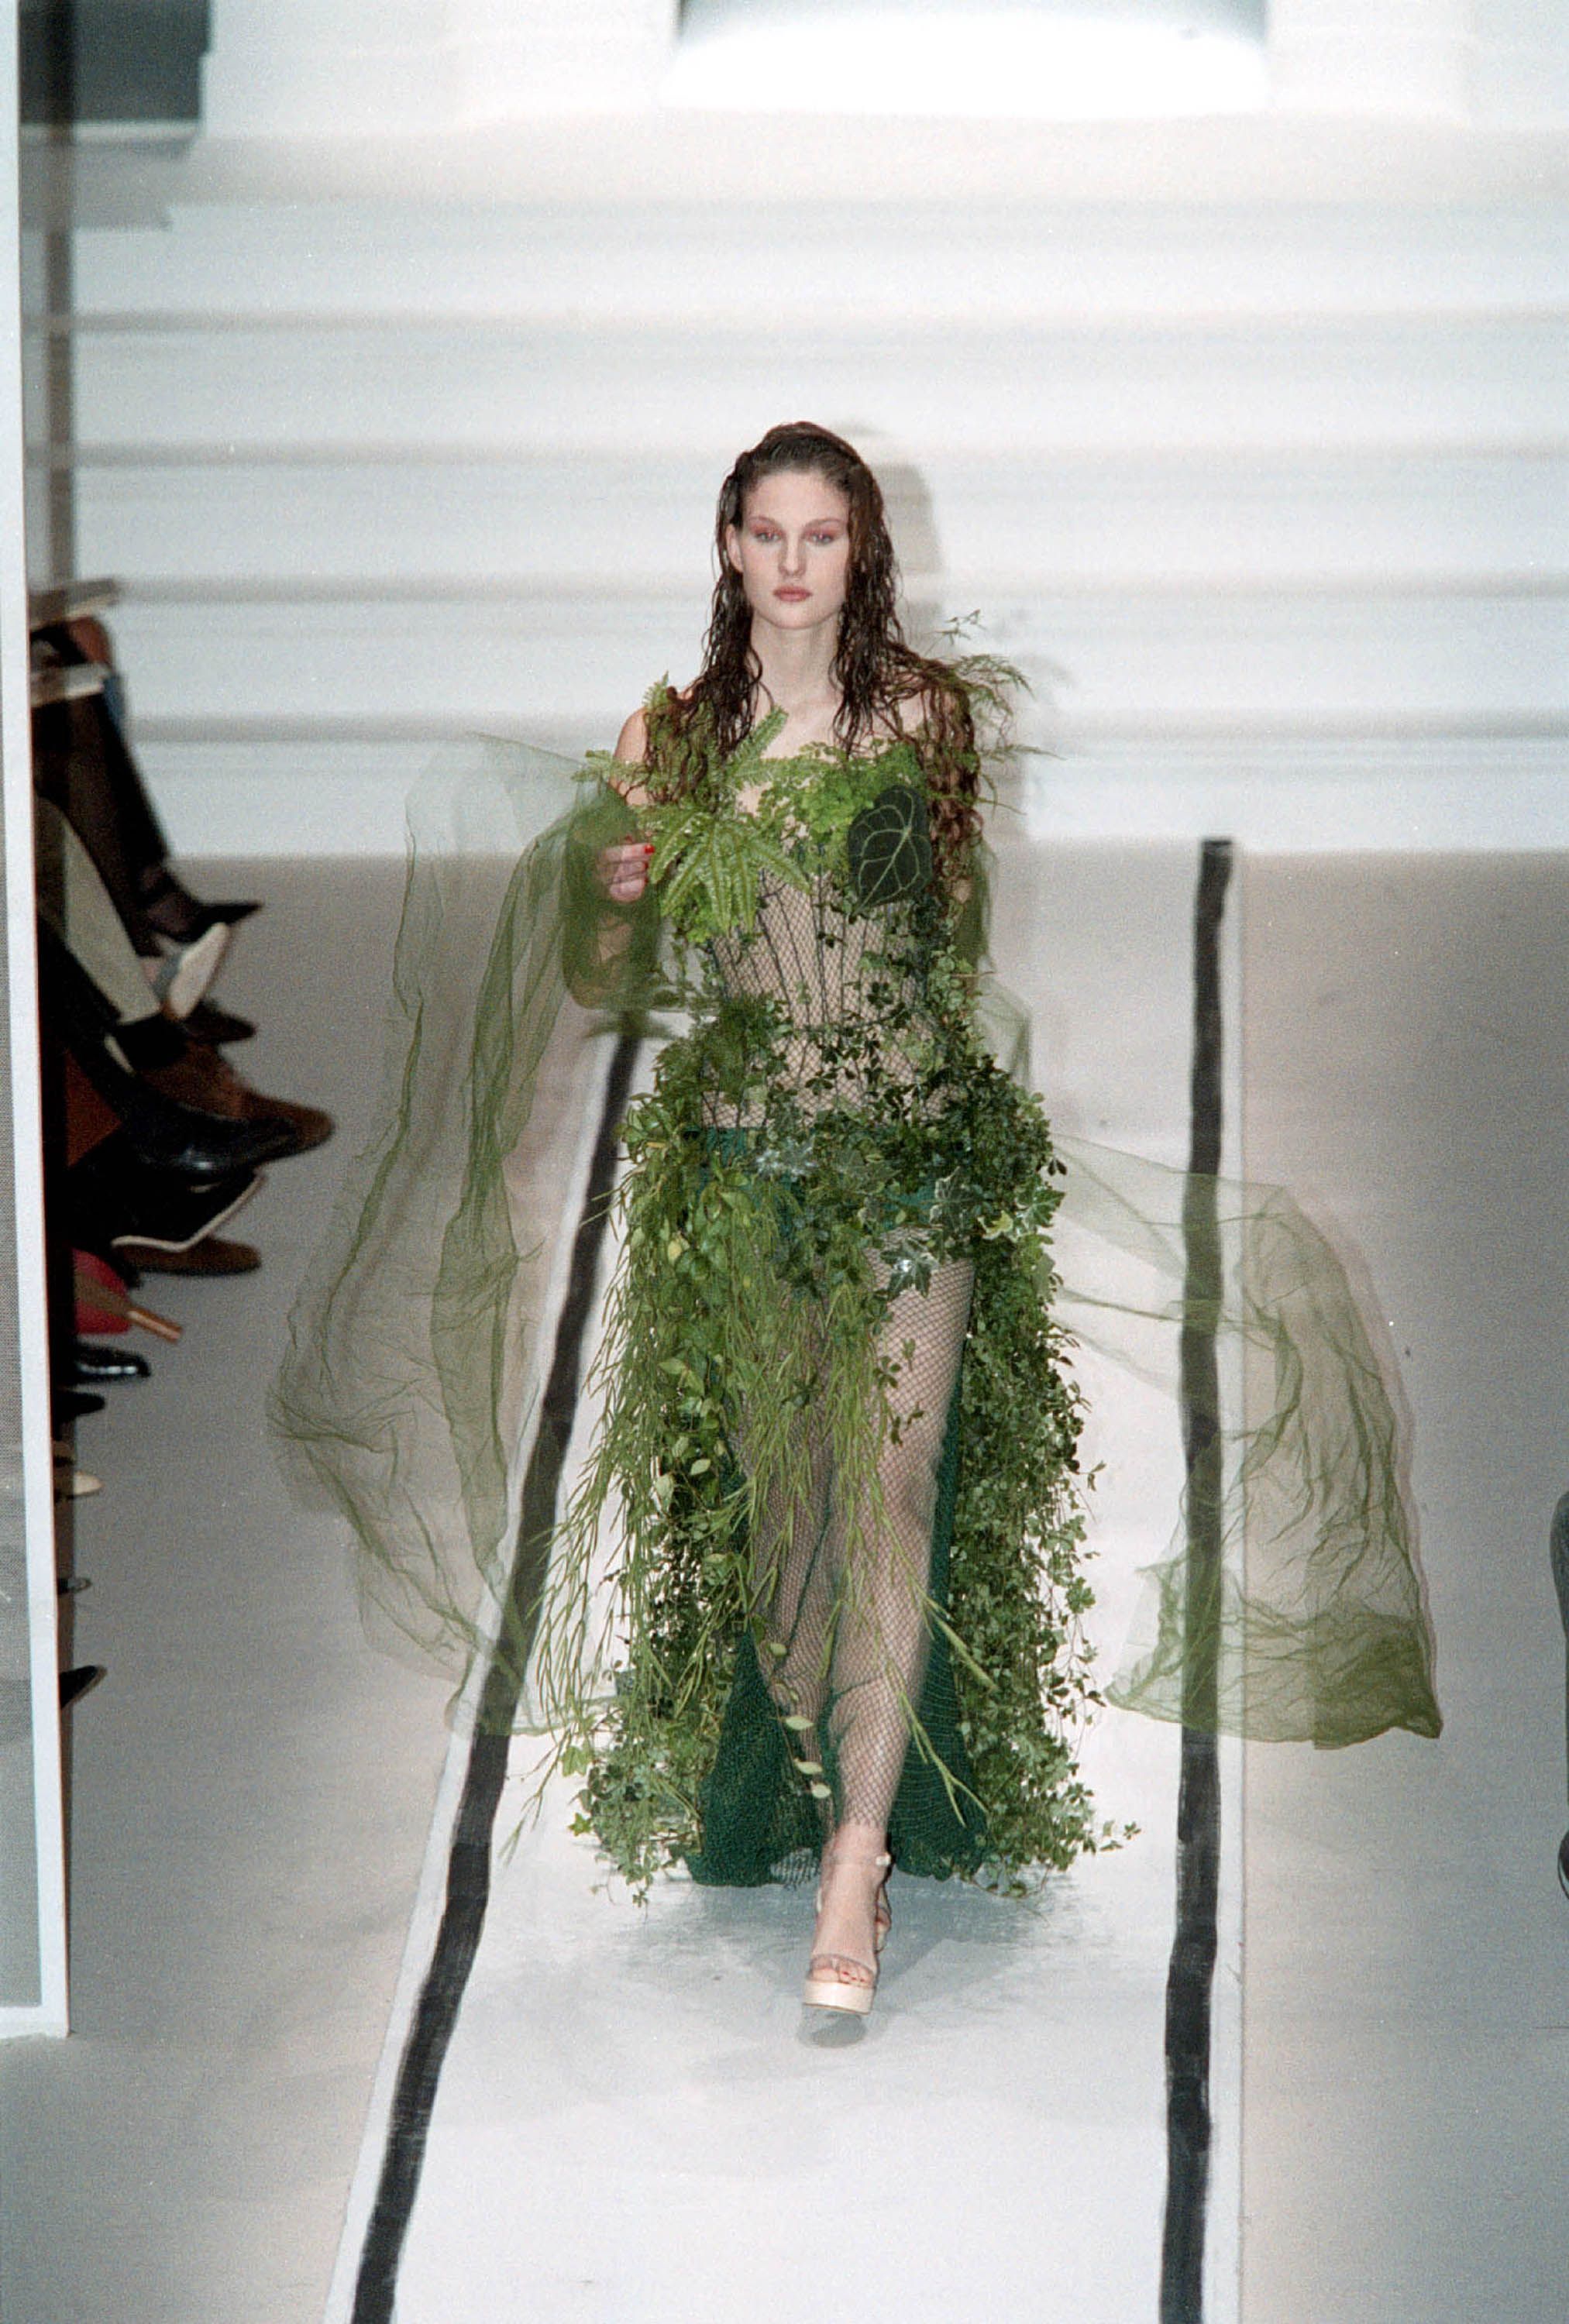 Earth Day With These Nature Runway Moments